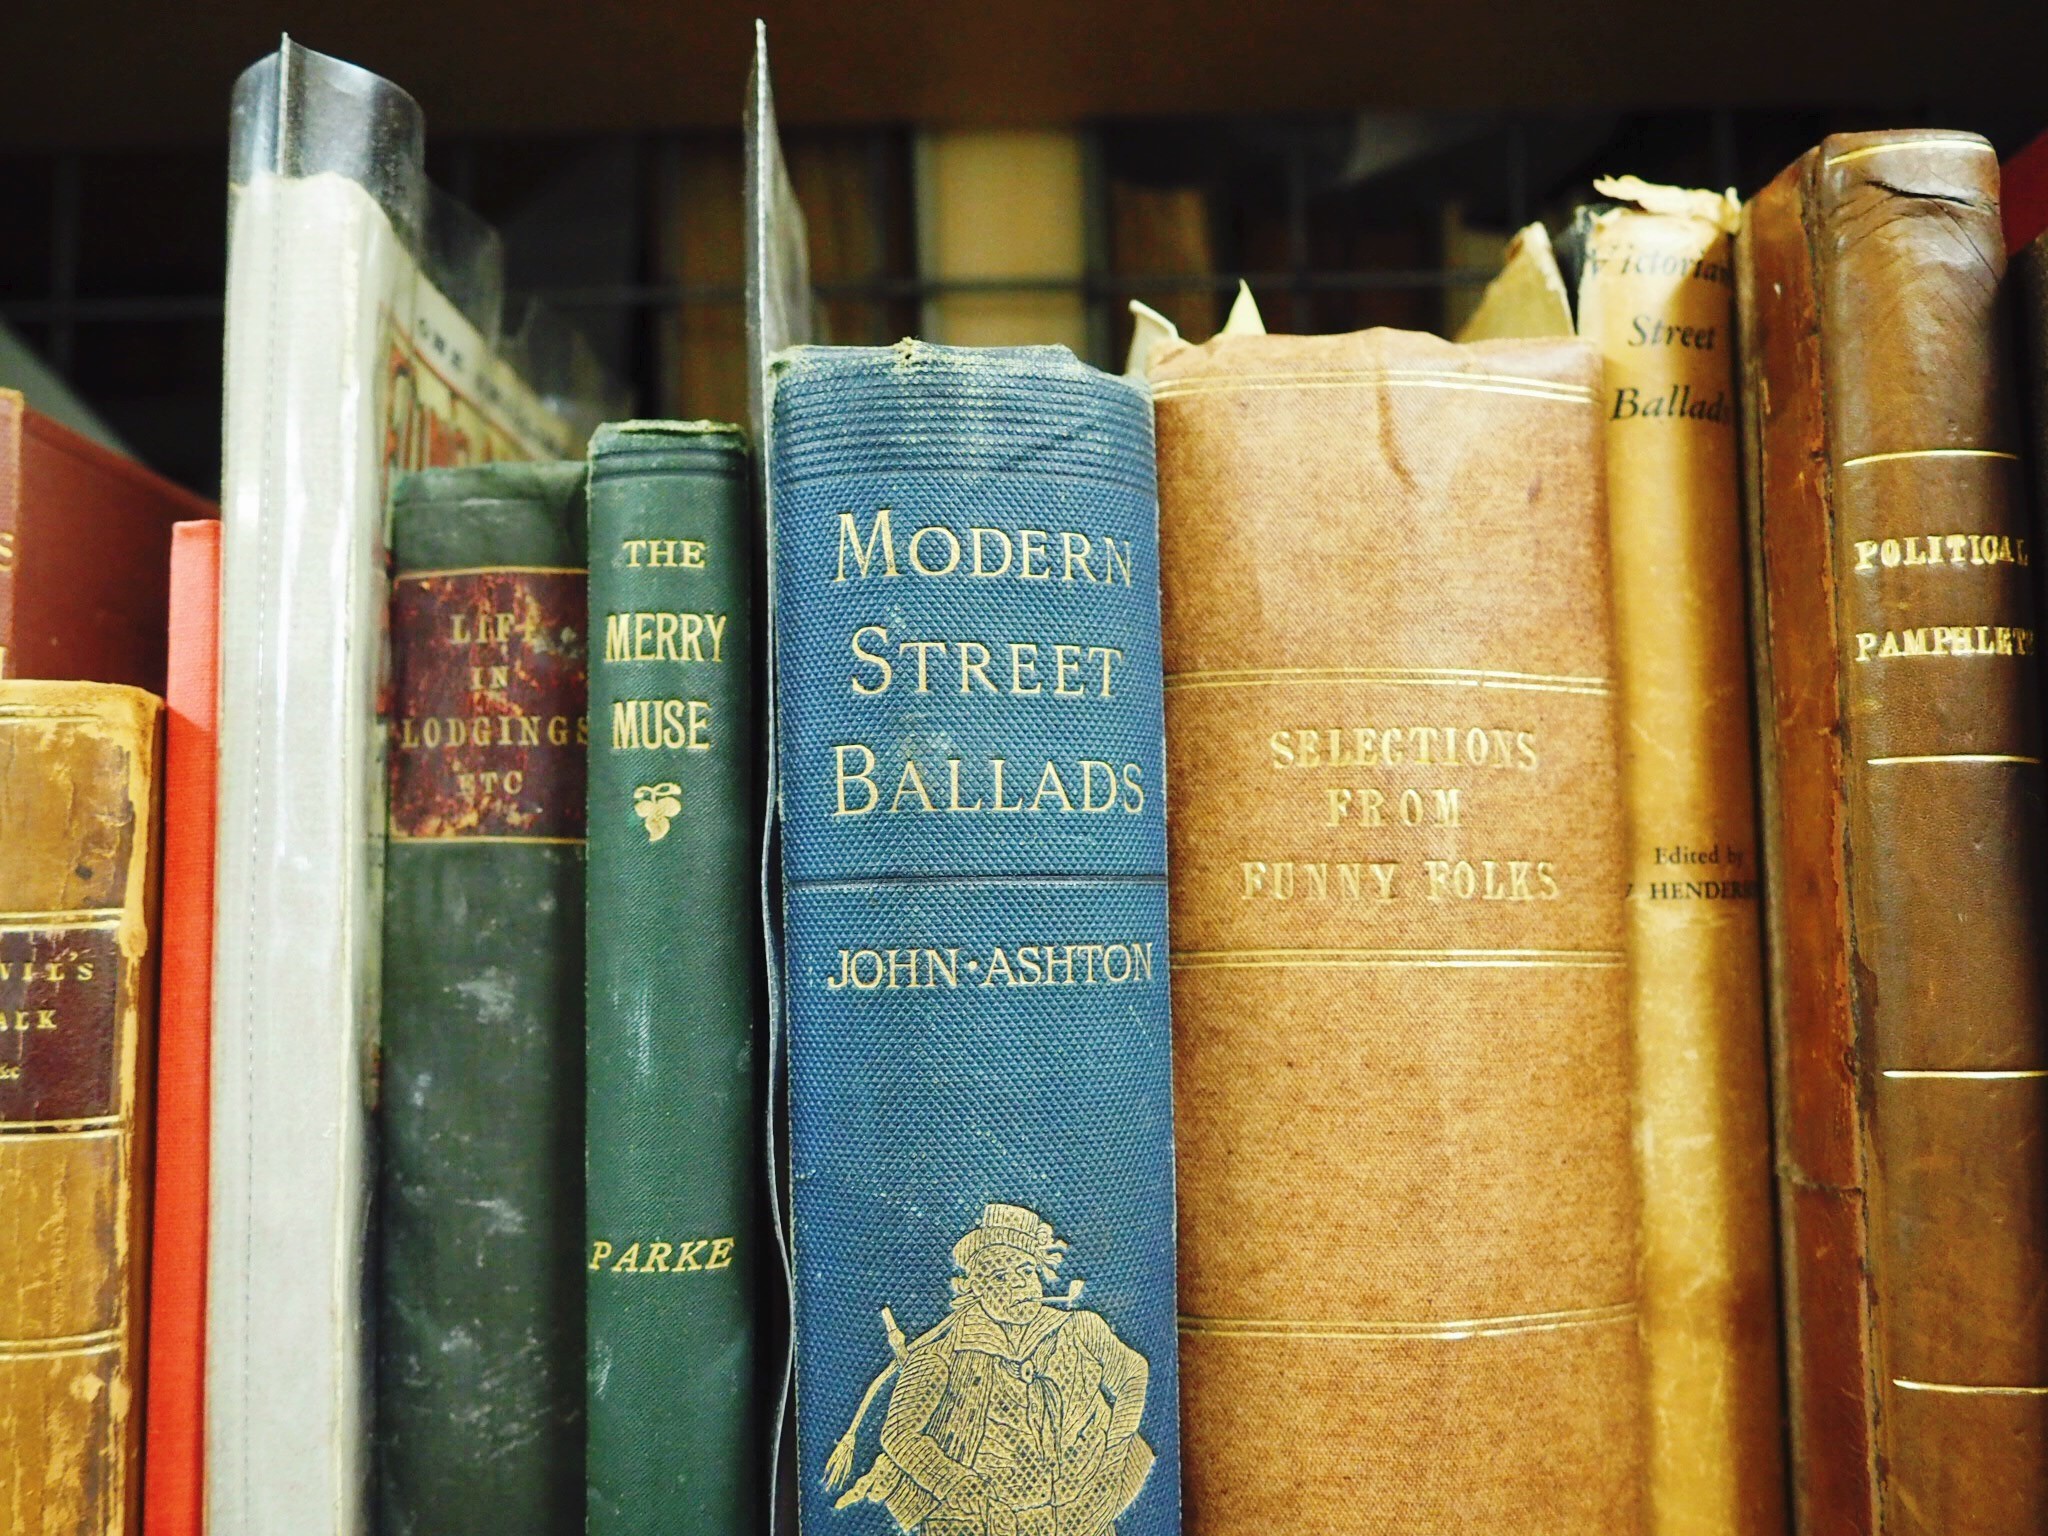 A colourful row of books from the John Crow Ballad and Song collection.